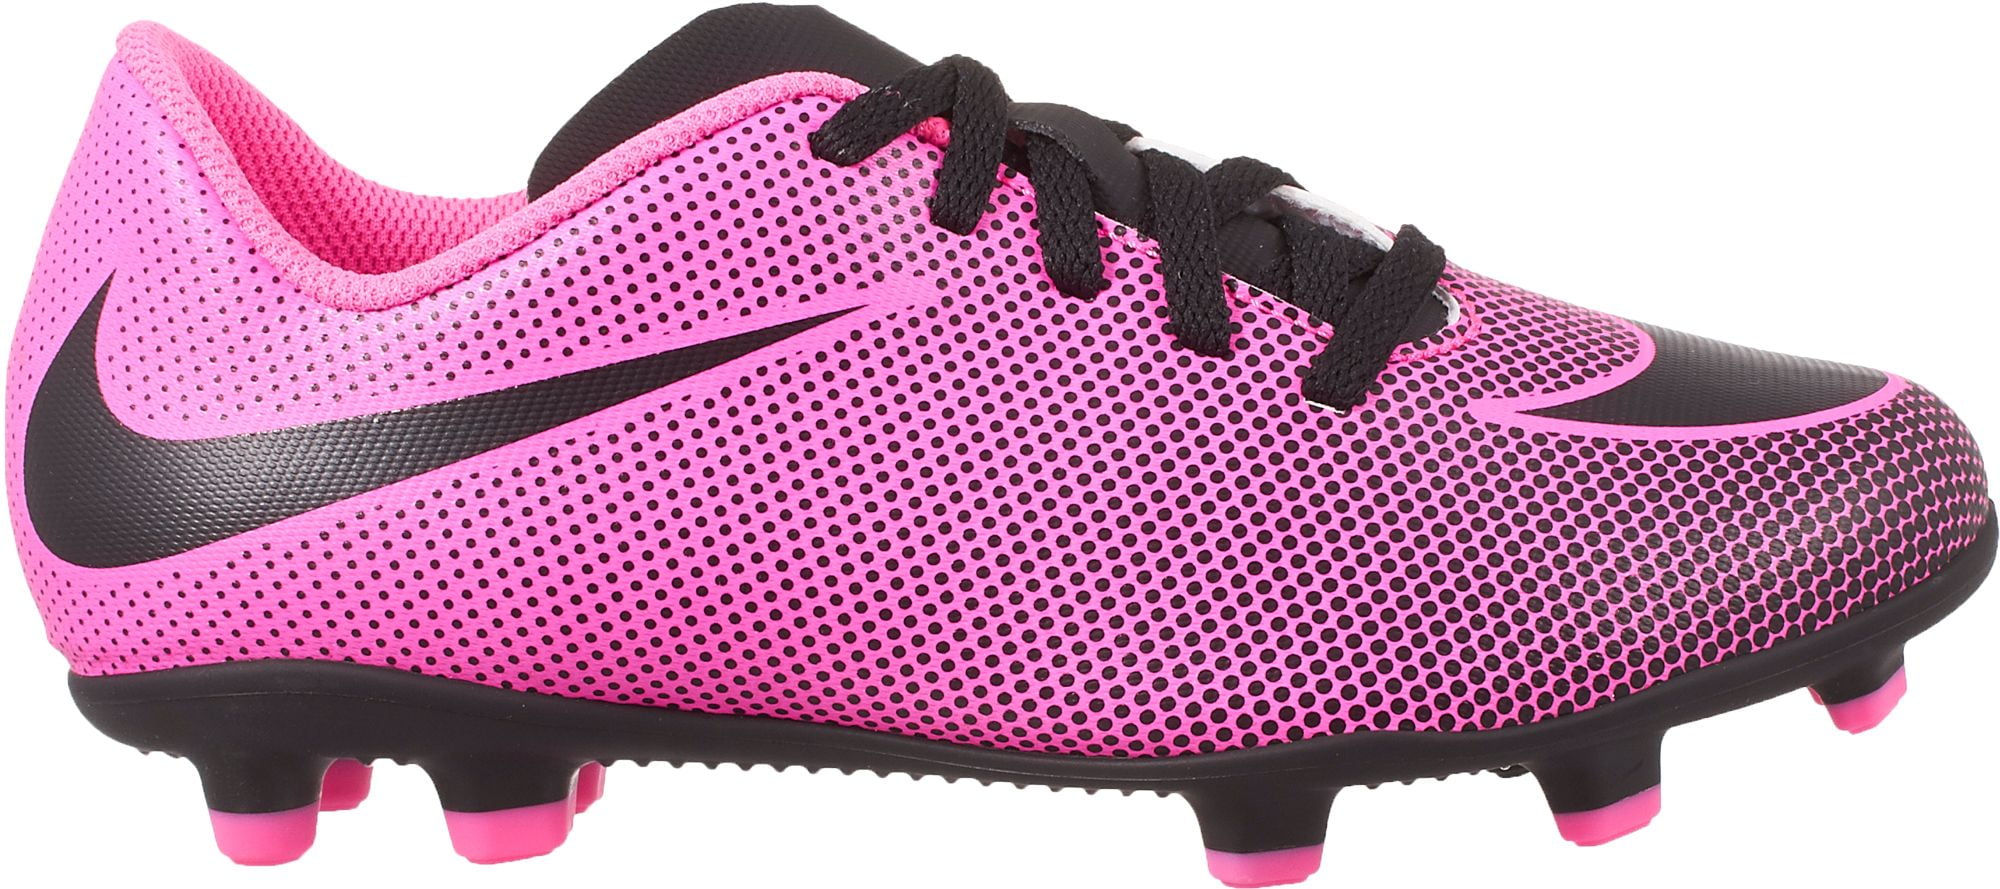 Starter Youth Girls Pink and Black Soccer Cleats Size 10 